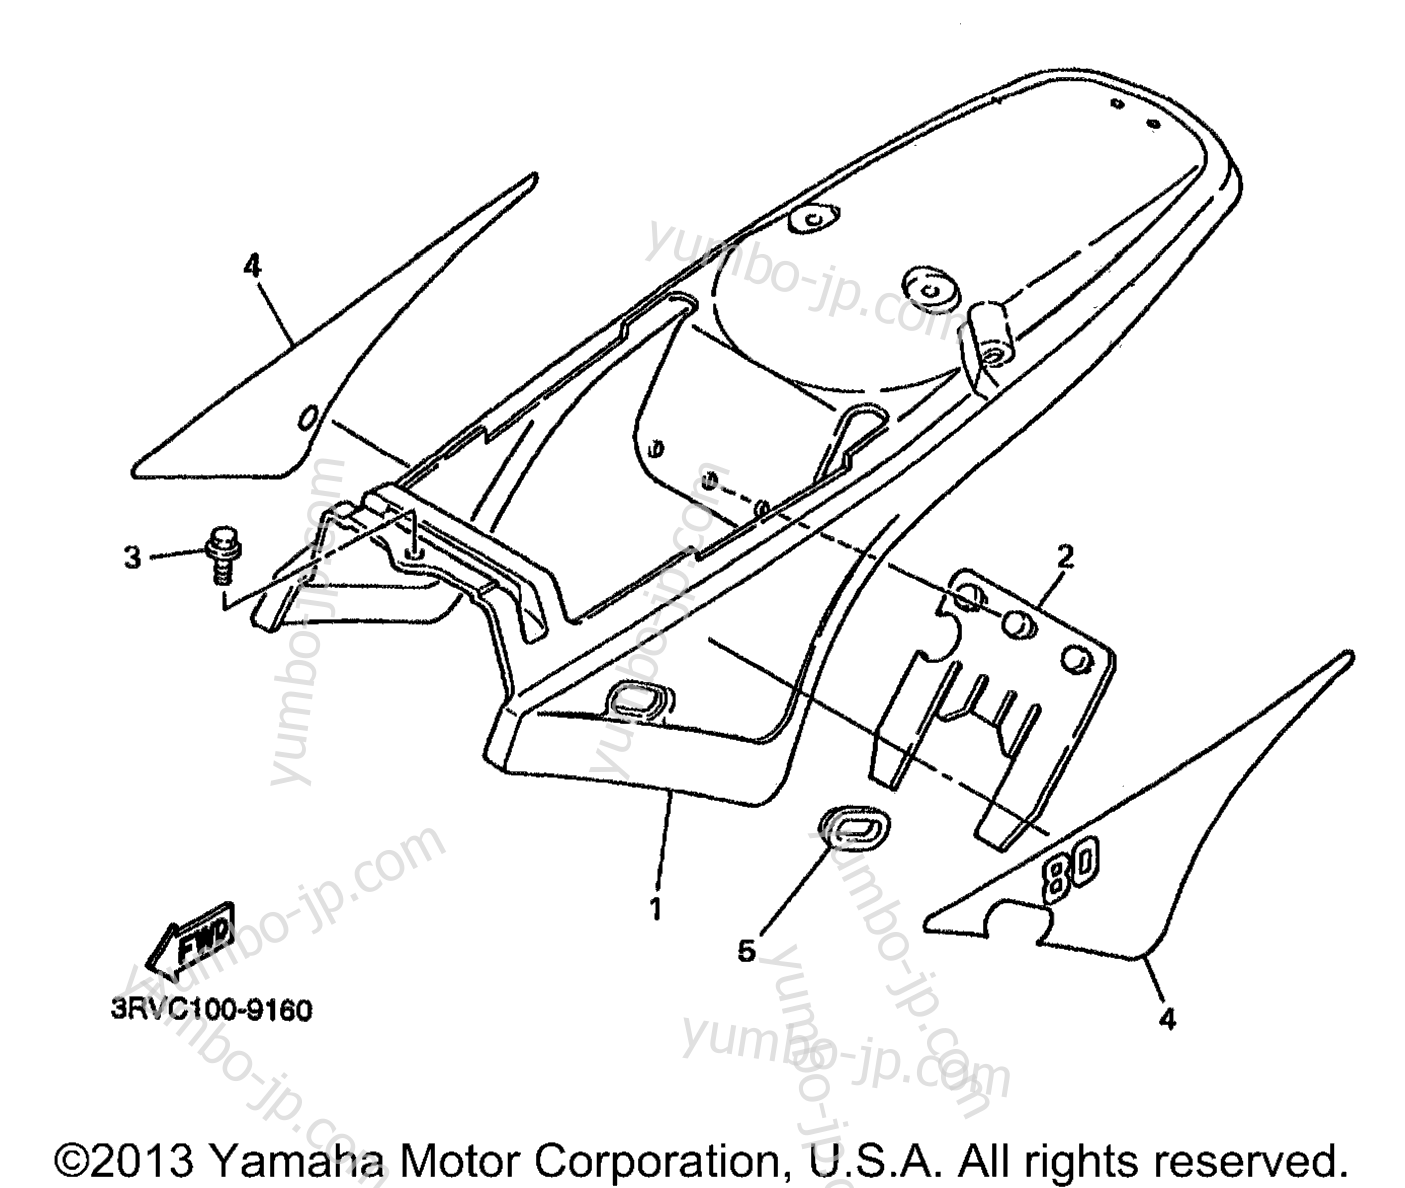 SIDE COVER for motorcycles YAMAHA PW80 (PW80L1) 1999 year